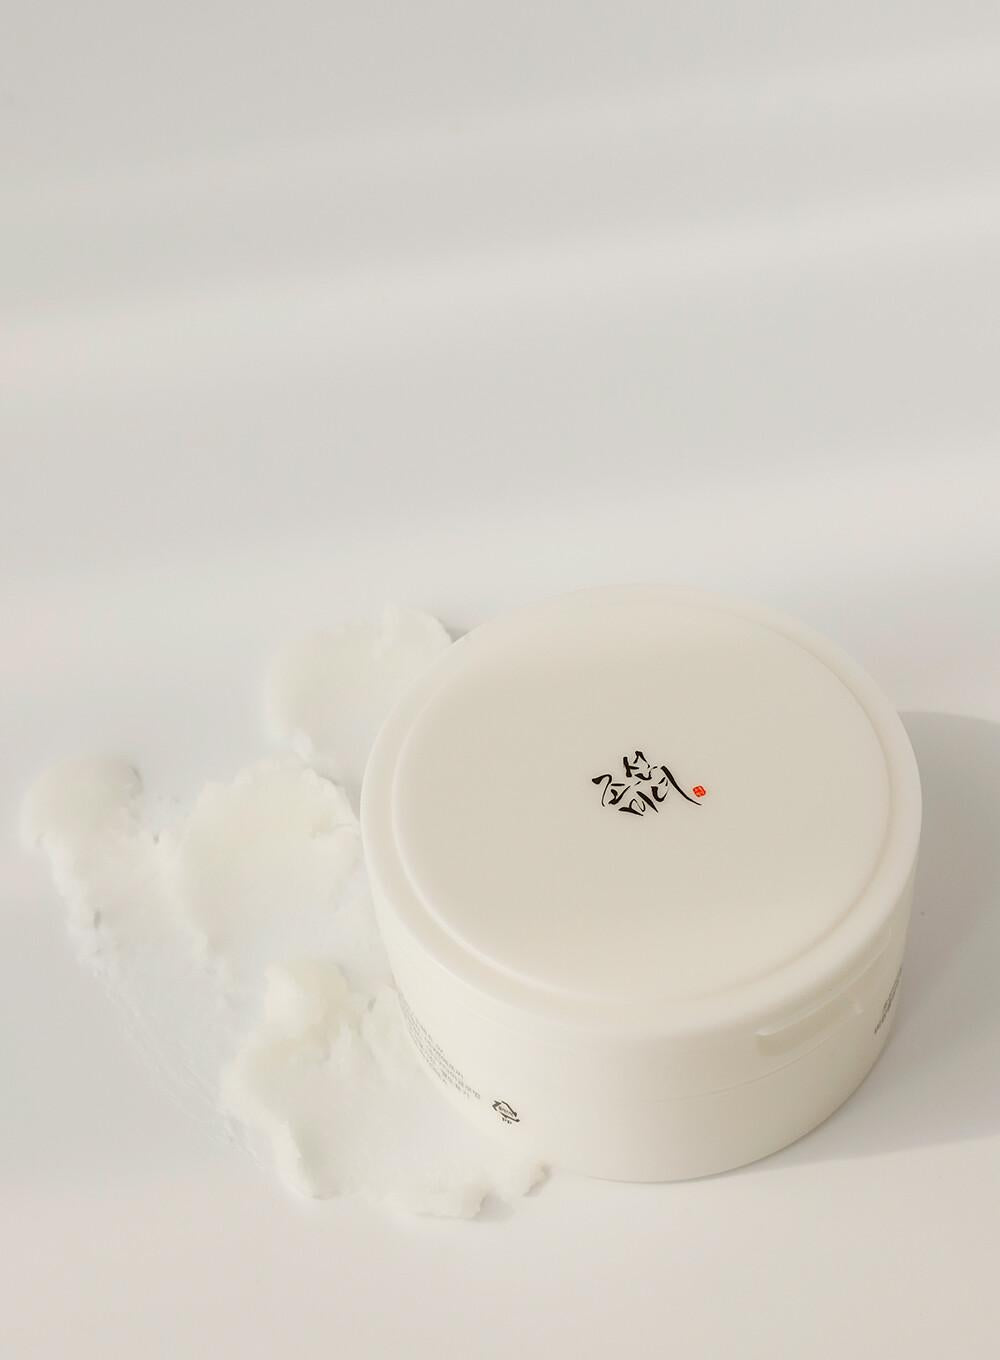 [Beauty Of Joseon] Radiance Cleansing Balm 100ml